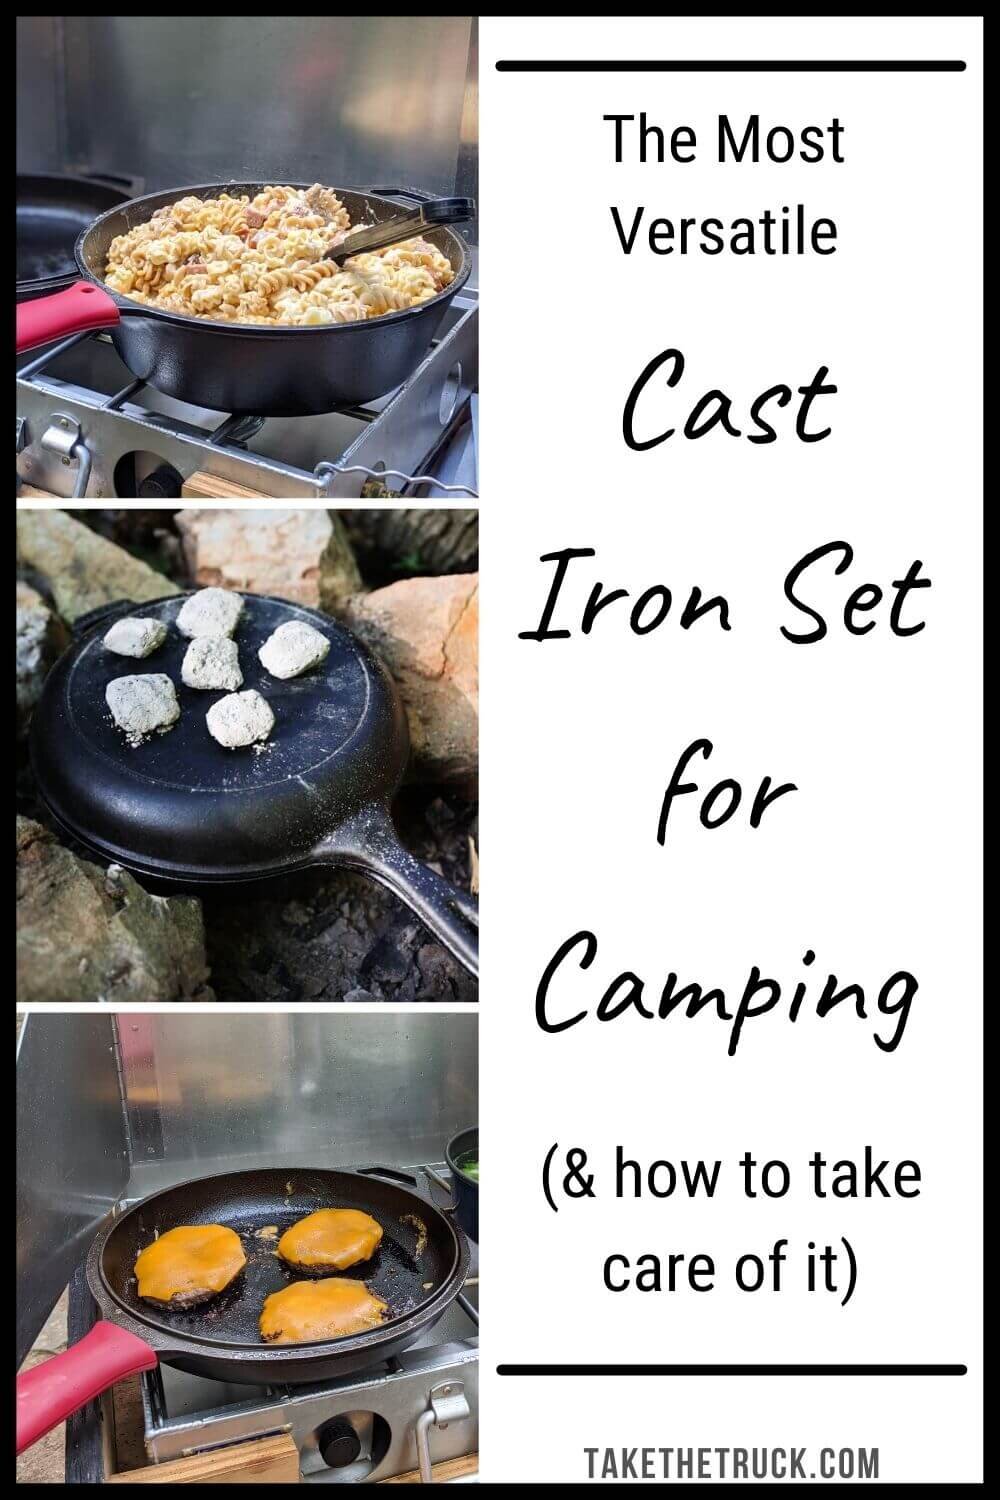 Learn about cast iron for camping - how to clean cast iron while camping, the best cast iron camping cookware and skillet, cast iron storage ideas for camping, cast iron campfire cooking.